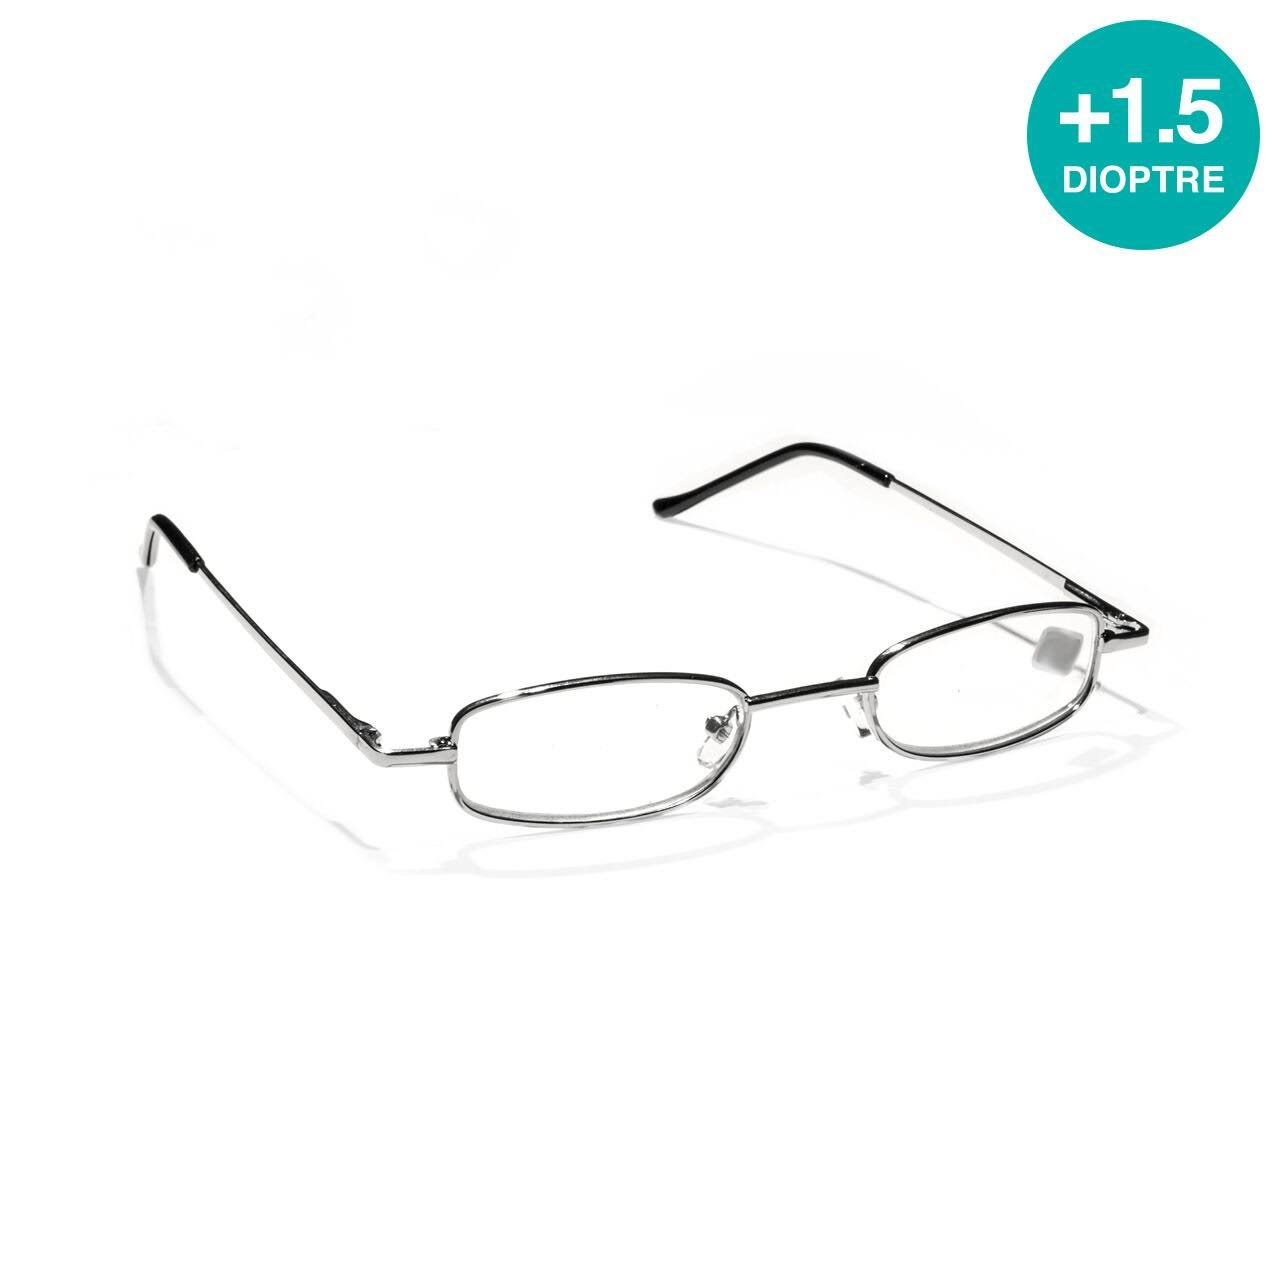 Safe & Sound Metal Frame Reading Glasses with Spring-hinged Temples, Dioptre +1.5, 4 cm x 2 cm